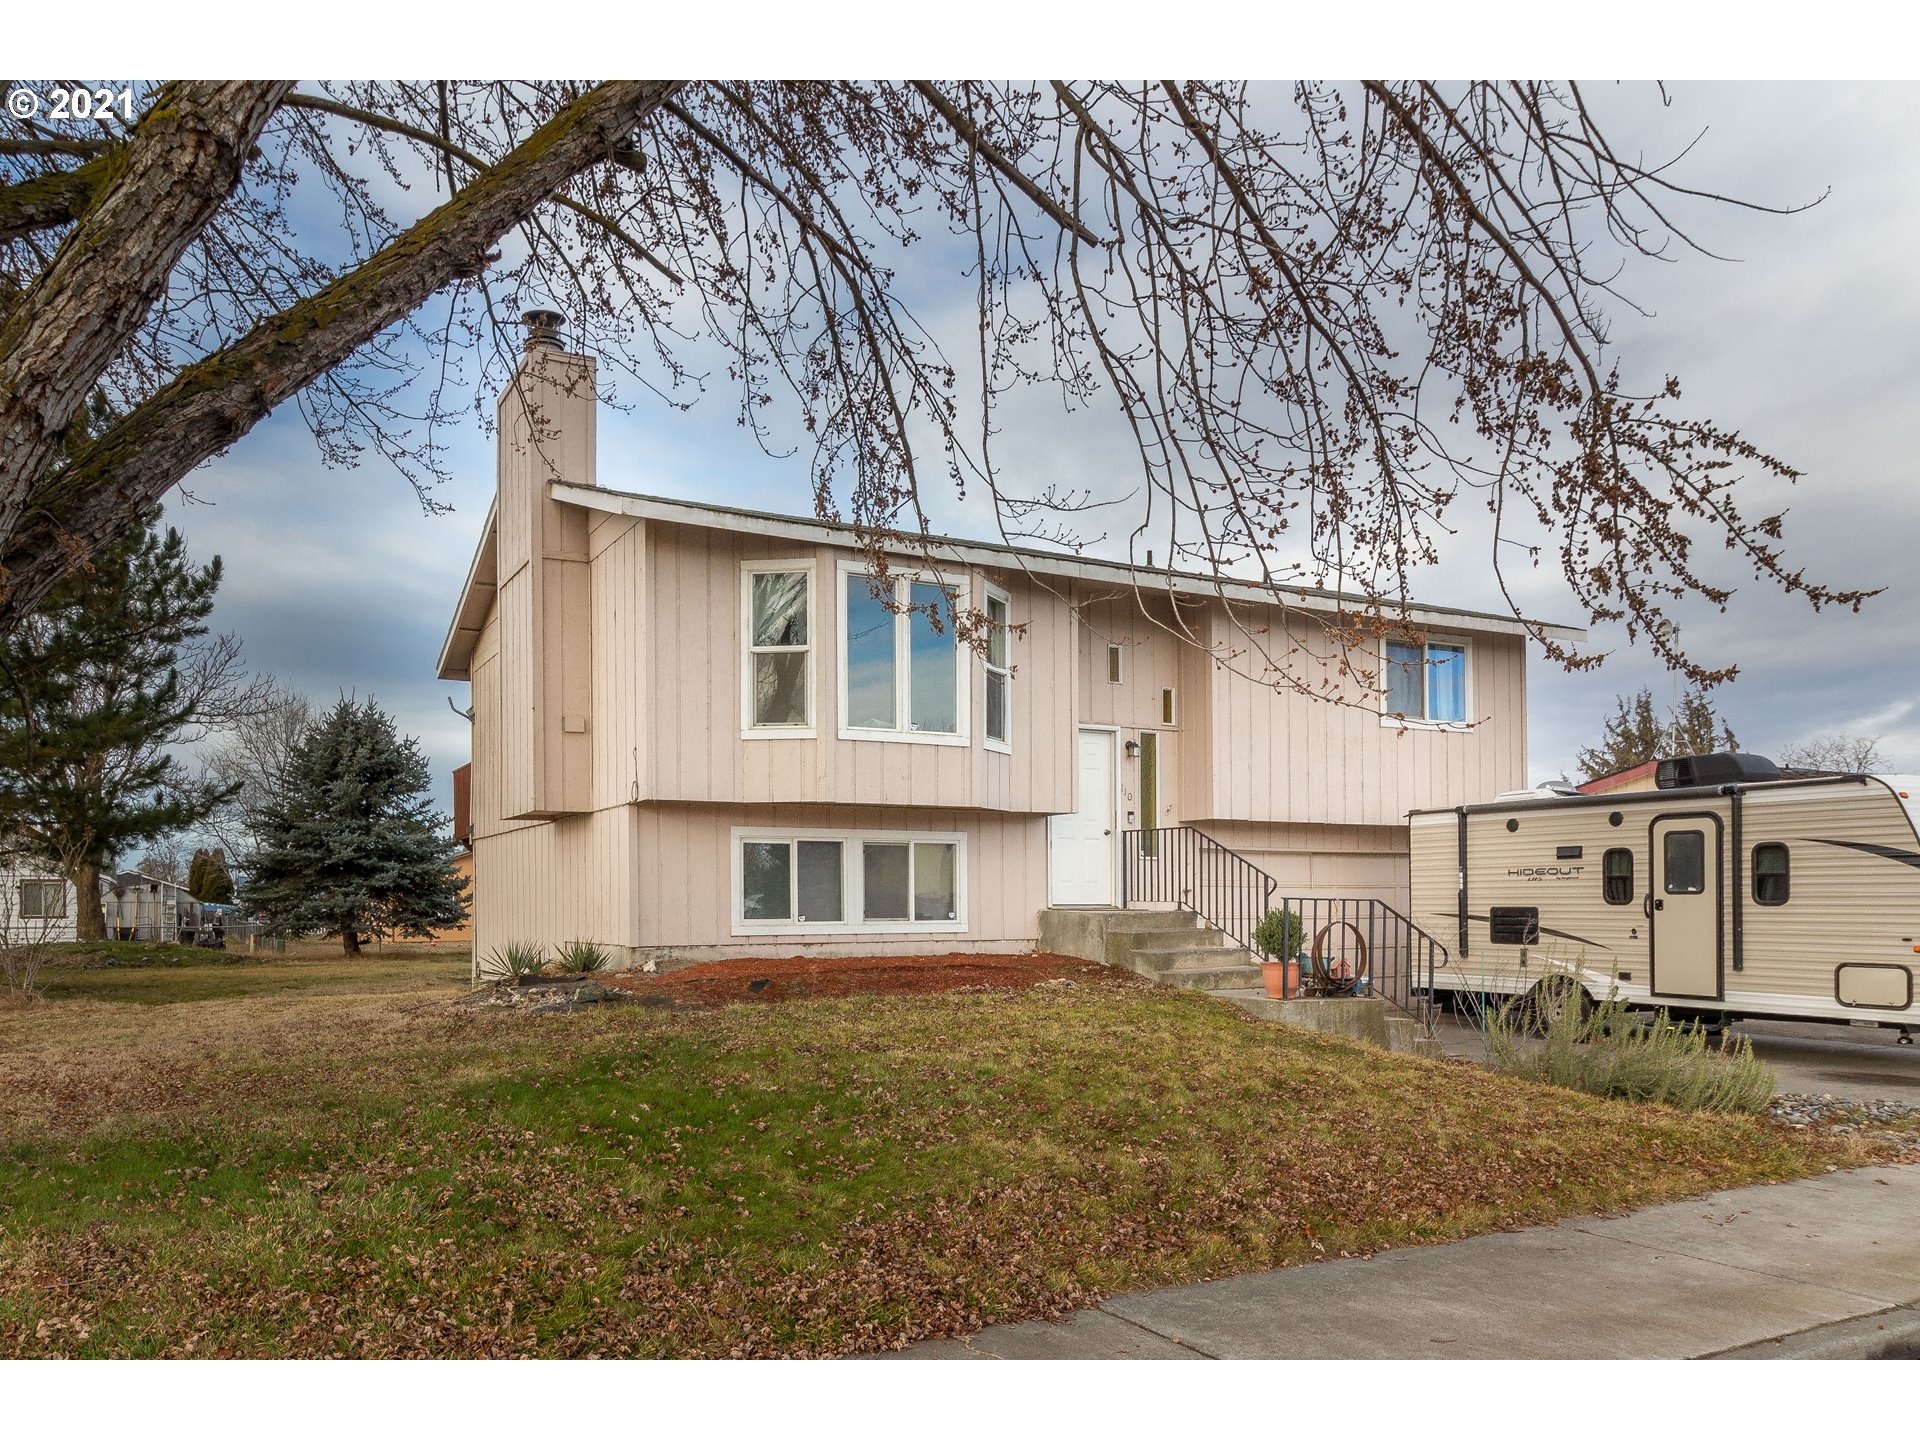 110 NACHES AVE (1 of 30)